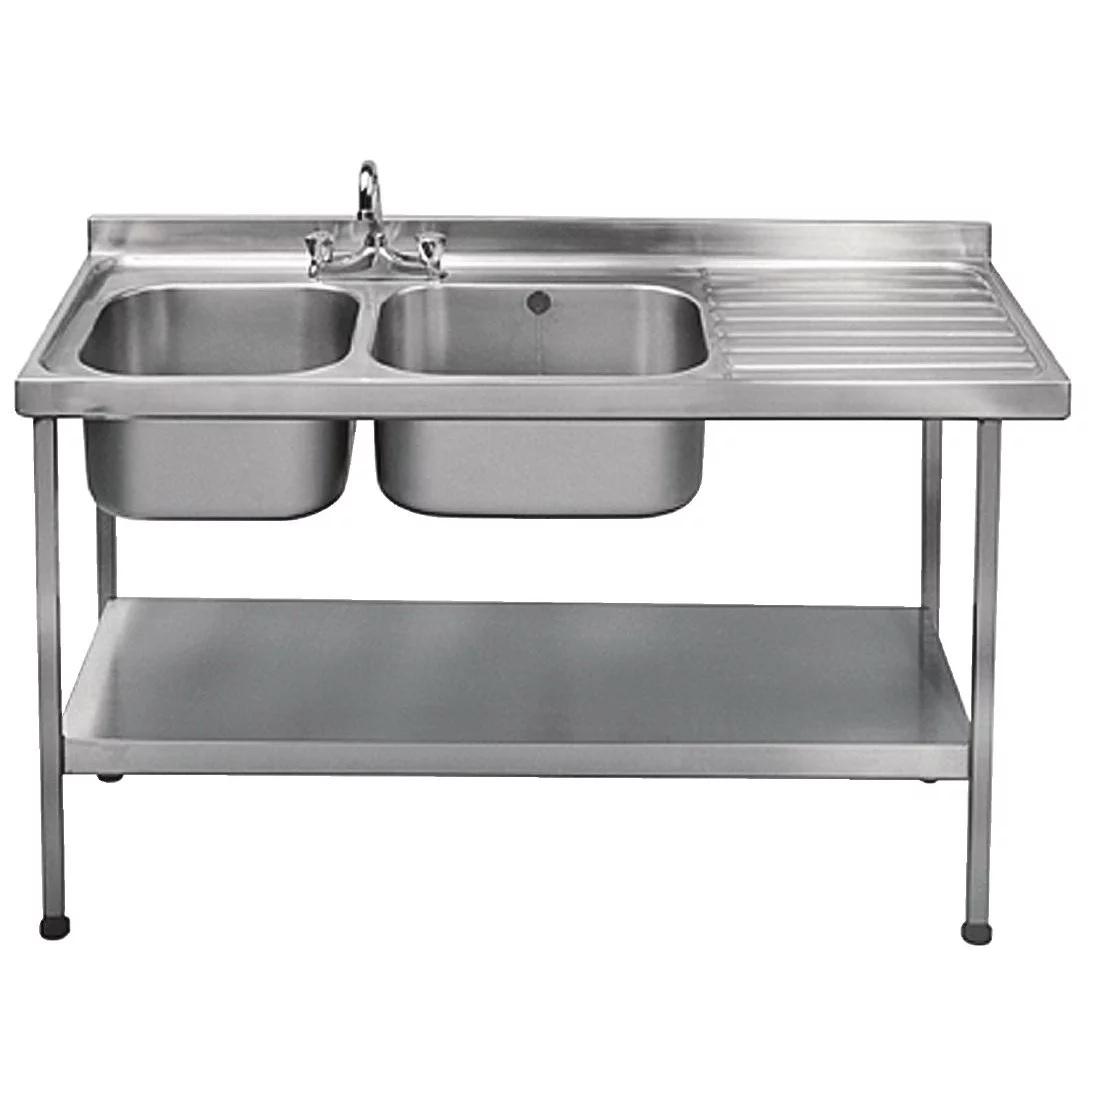 DN602 Stainless Steel Sink Double Left Hand Bowl 1500x 600mm